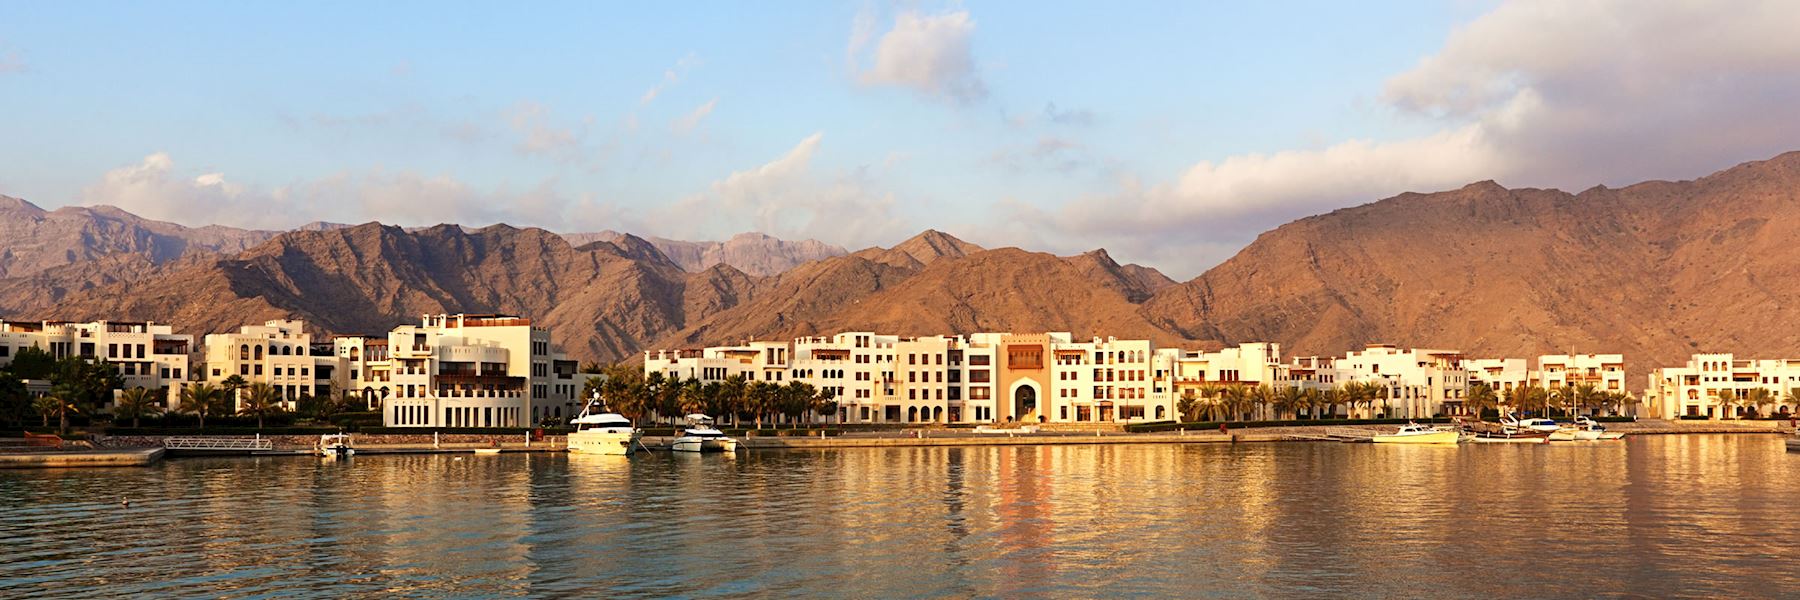 Places to visit in Oman | Audley Travel